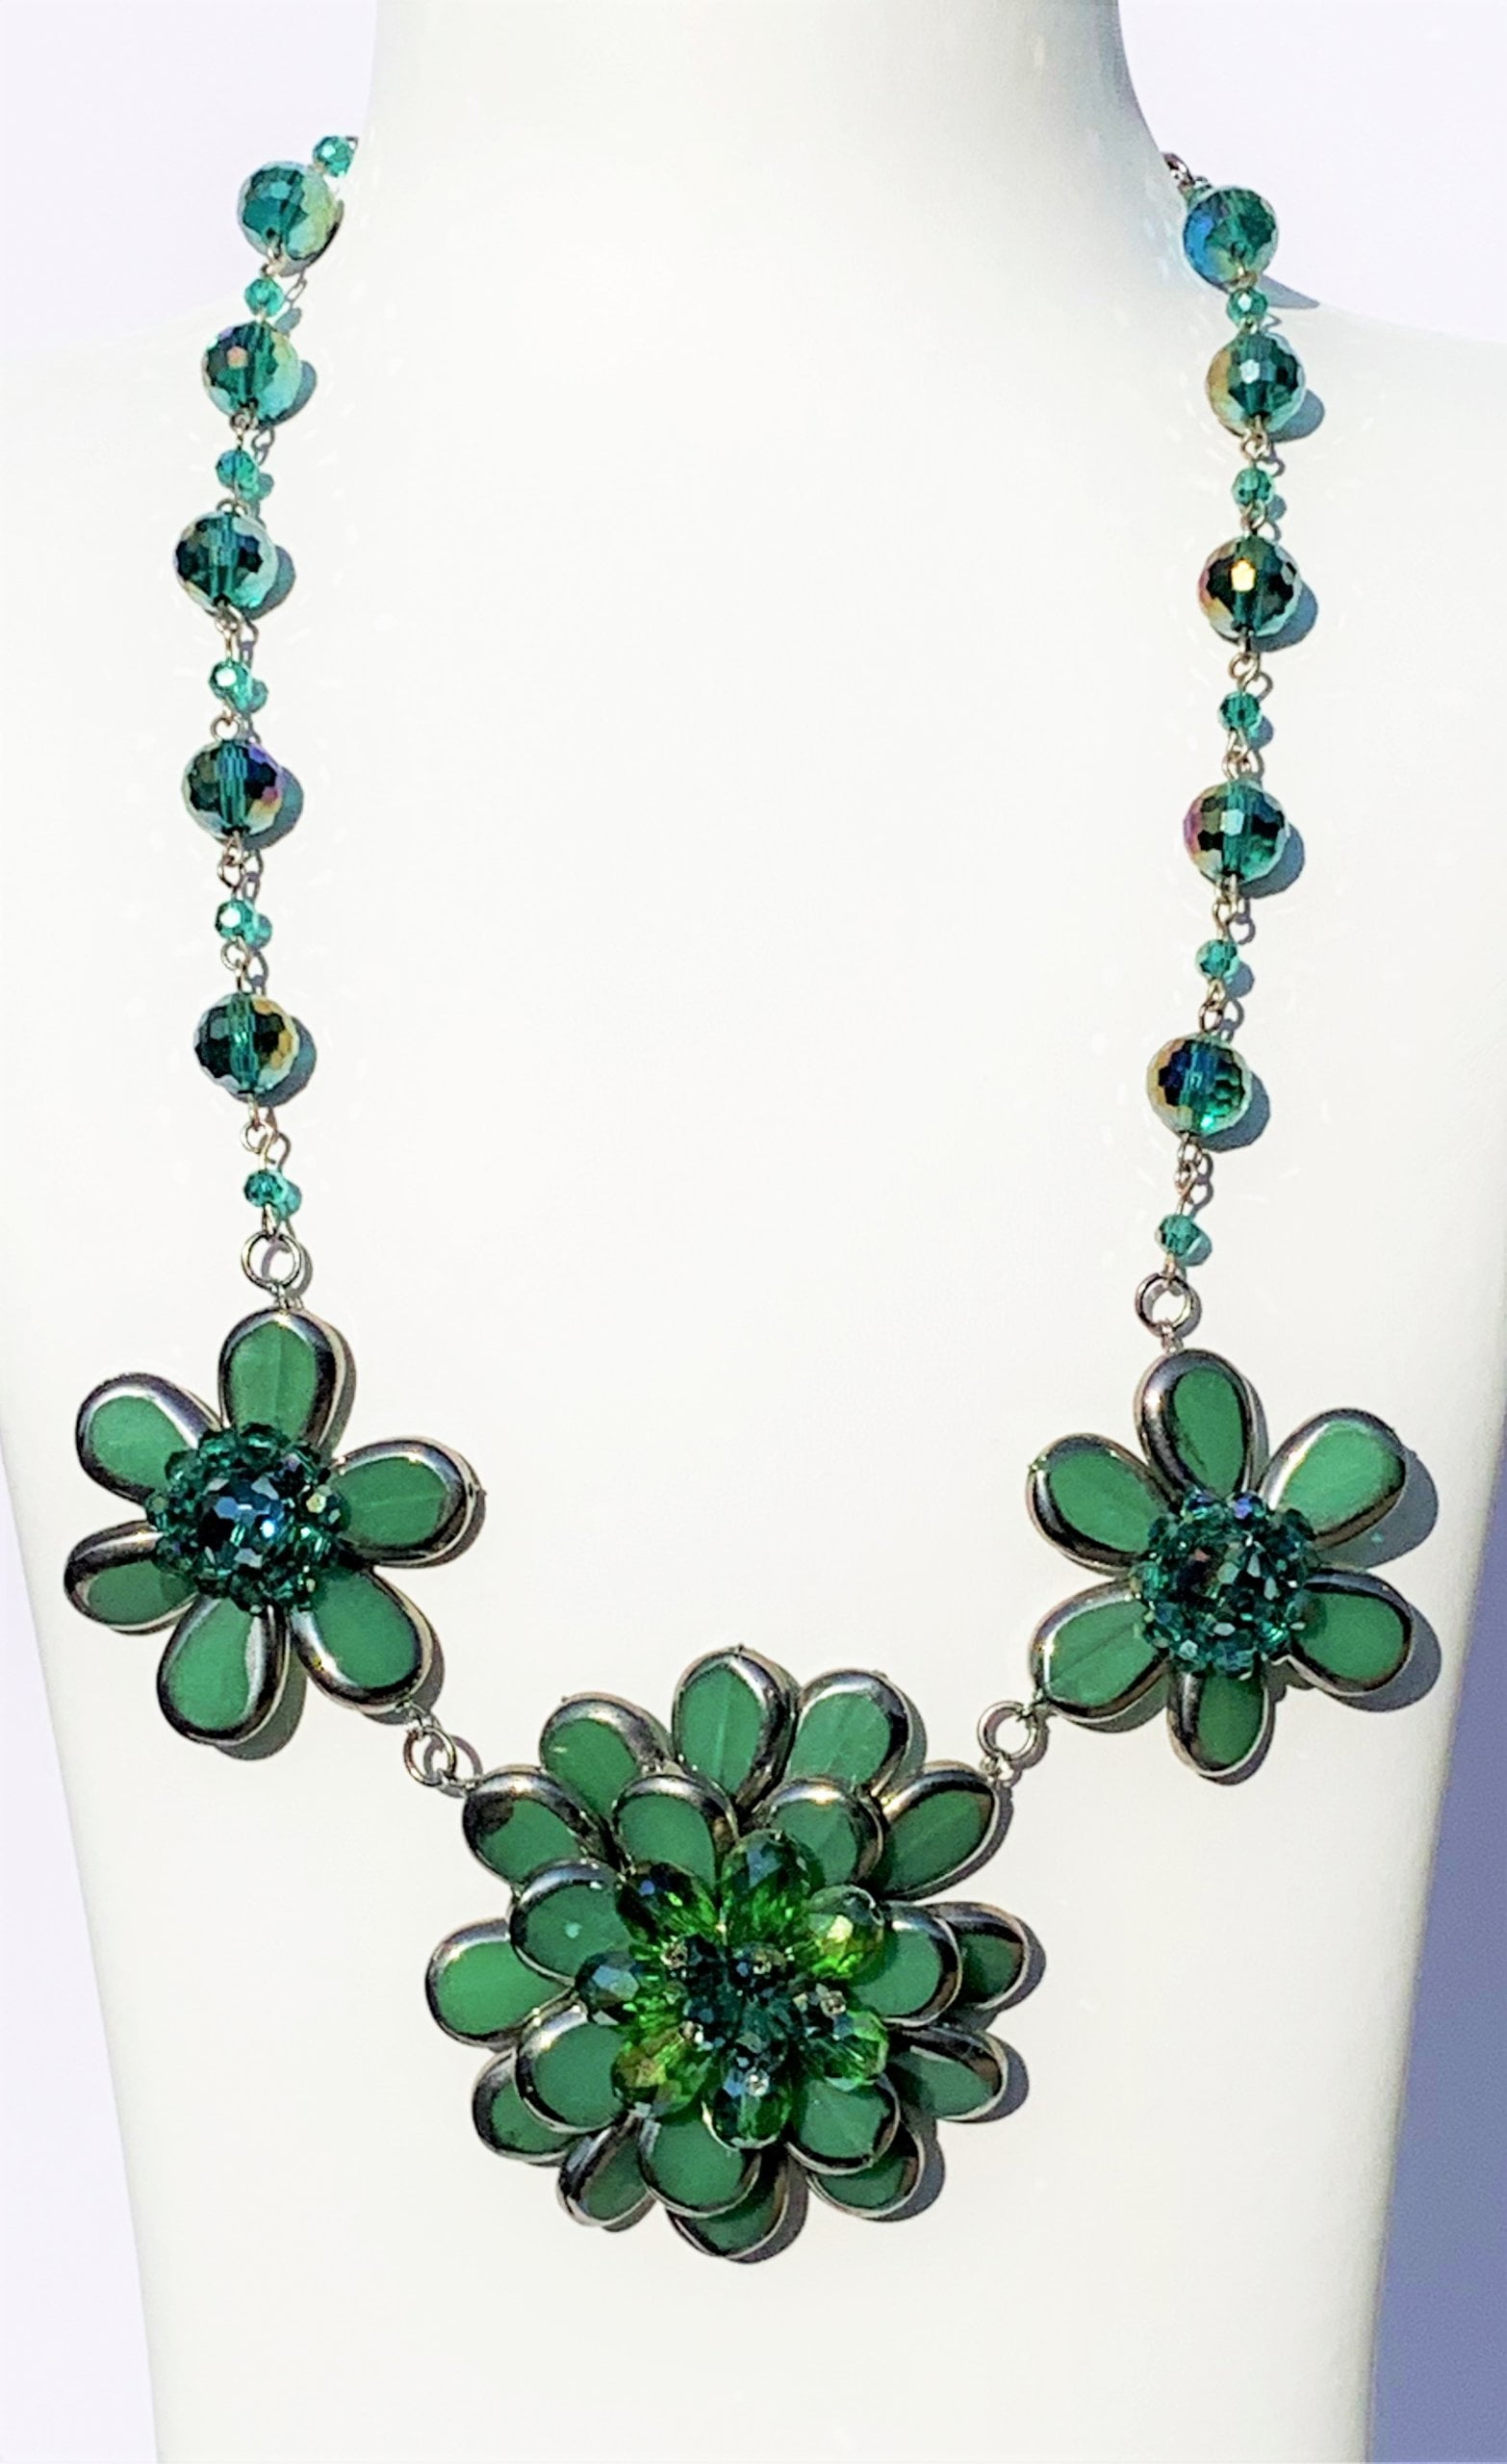 Butler and wilson green flower necklace